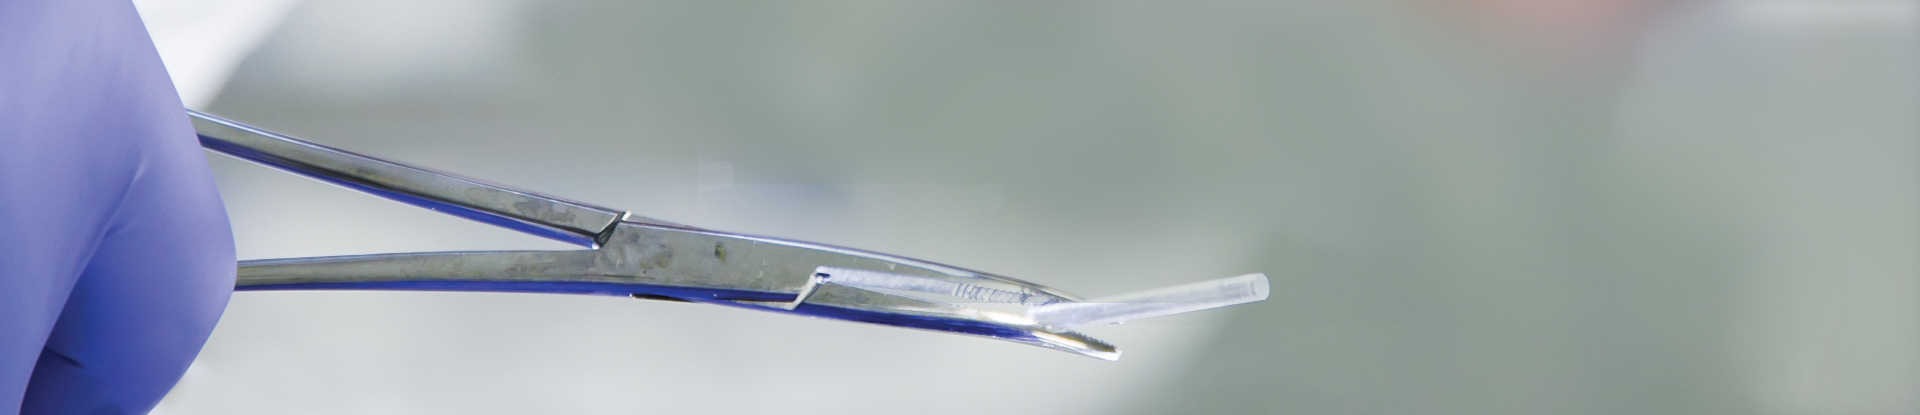 A subdermal implant held by a medical clamp